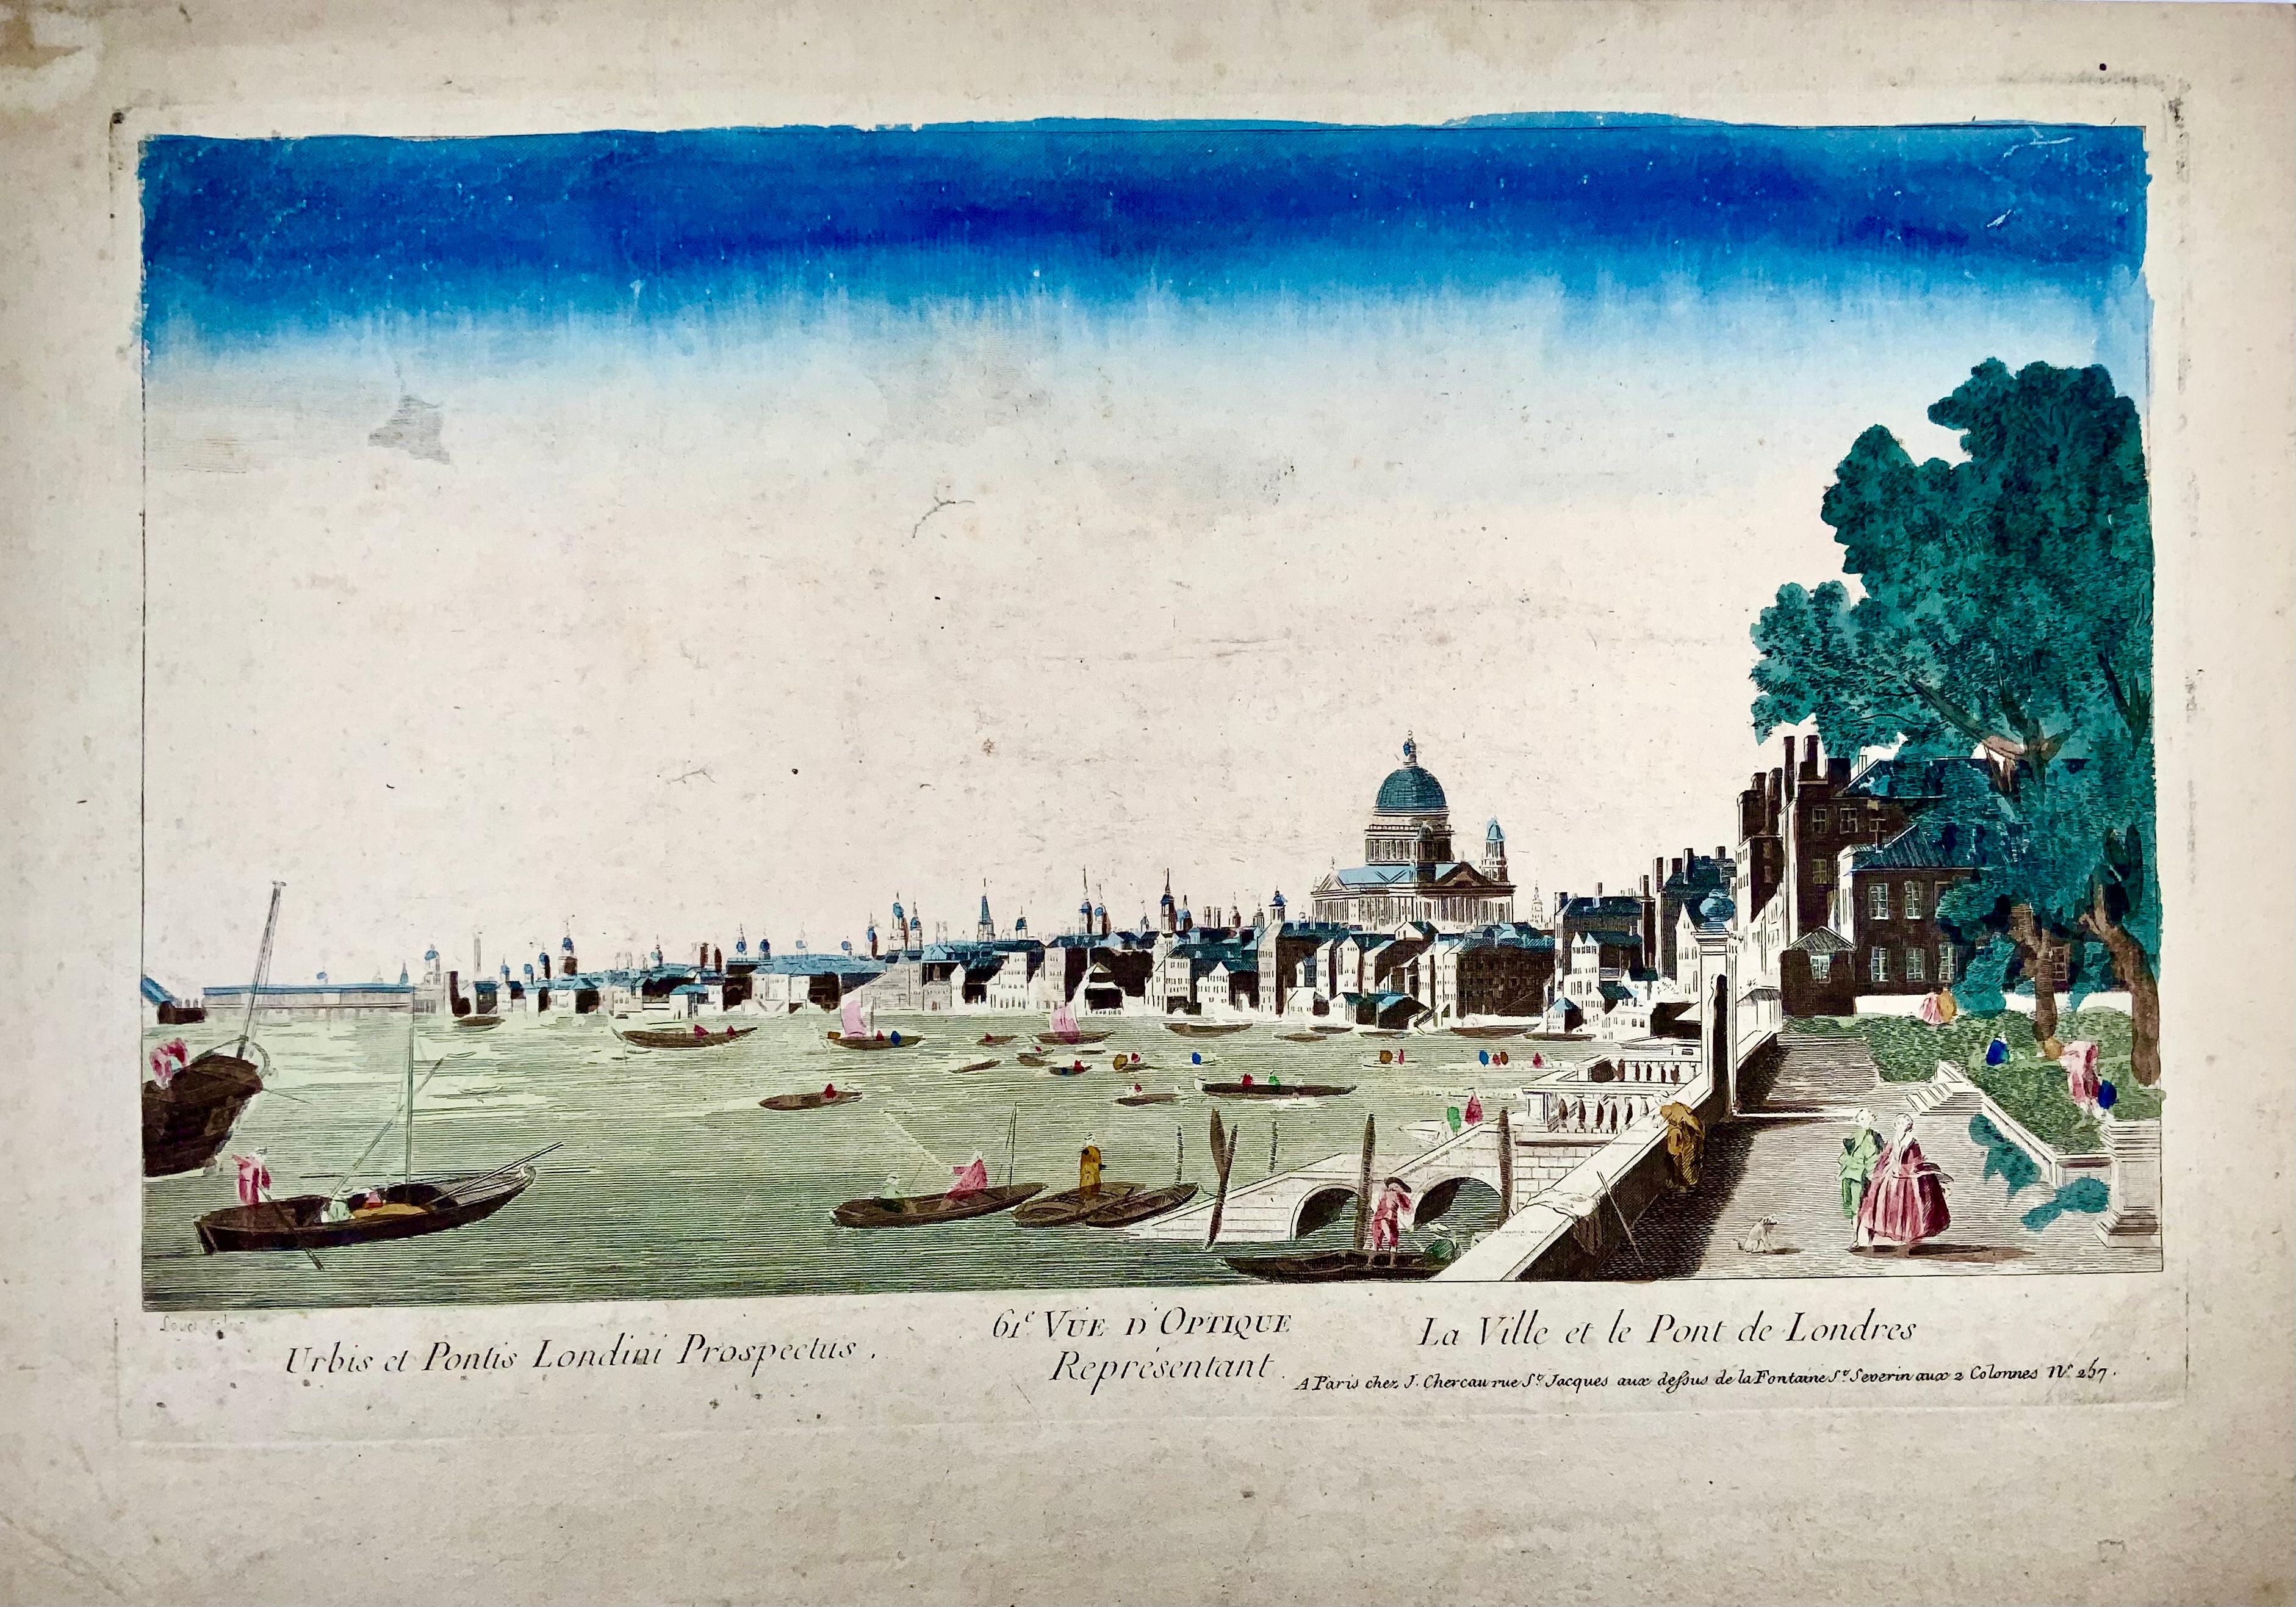 Optical view of London (England)
 
XVIIIth century optical view in original watercolors. 

Original copper plate engraving on laid paper heightened with watercolor at that time engraved by Loyer. 

Published by Jean-François Daumont in Paris